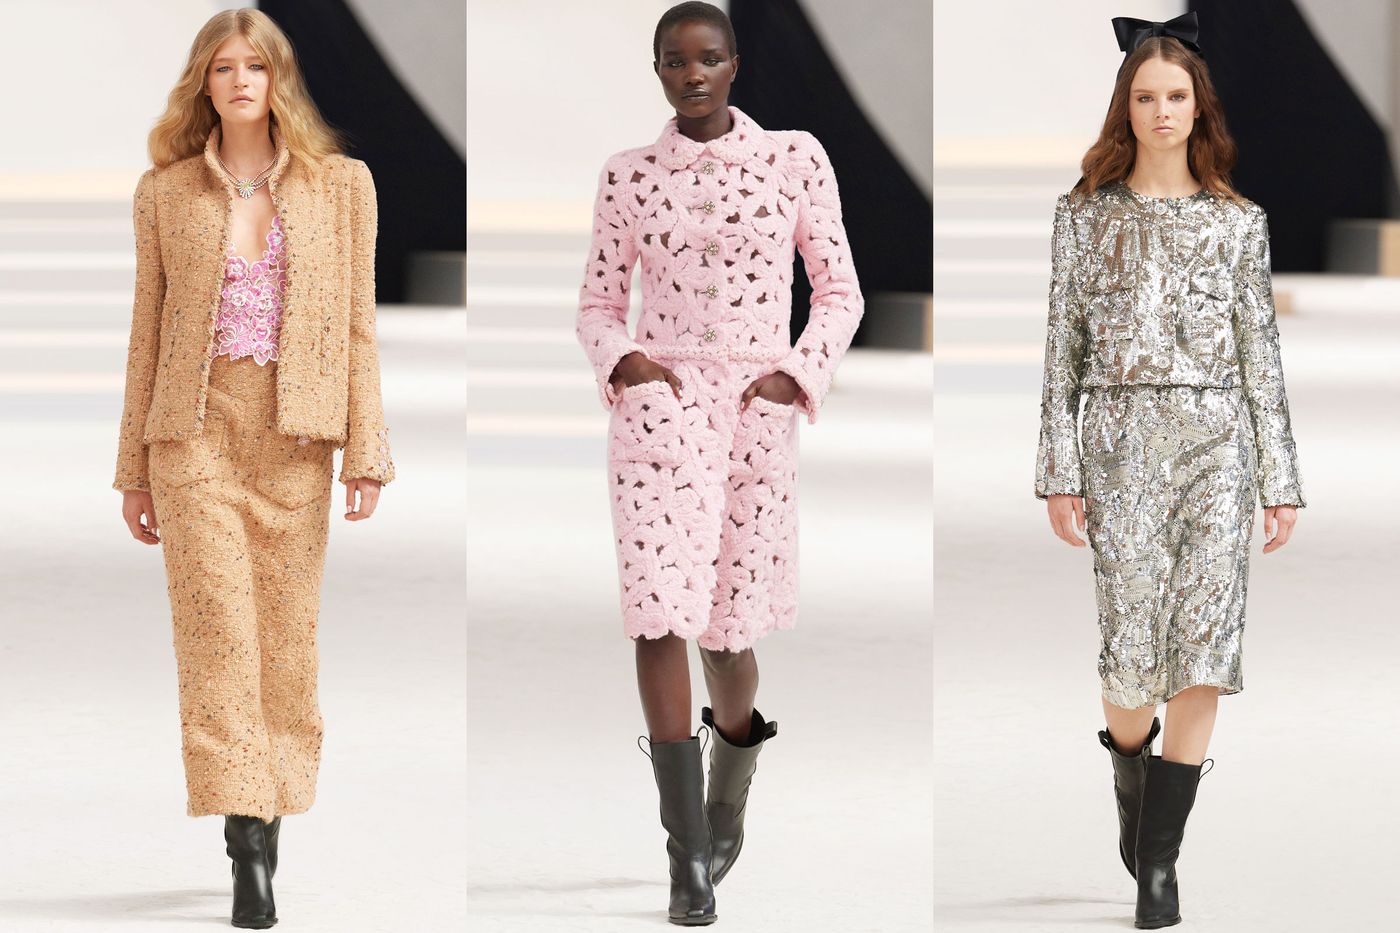 Chanel Spring 2022 Ready-to-Wear Fashion Show, Vogue